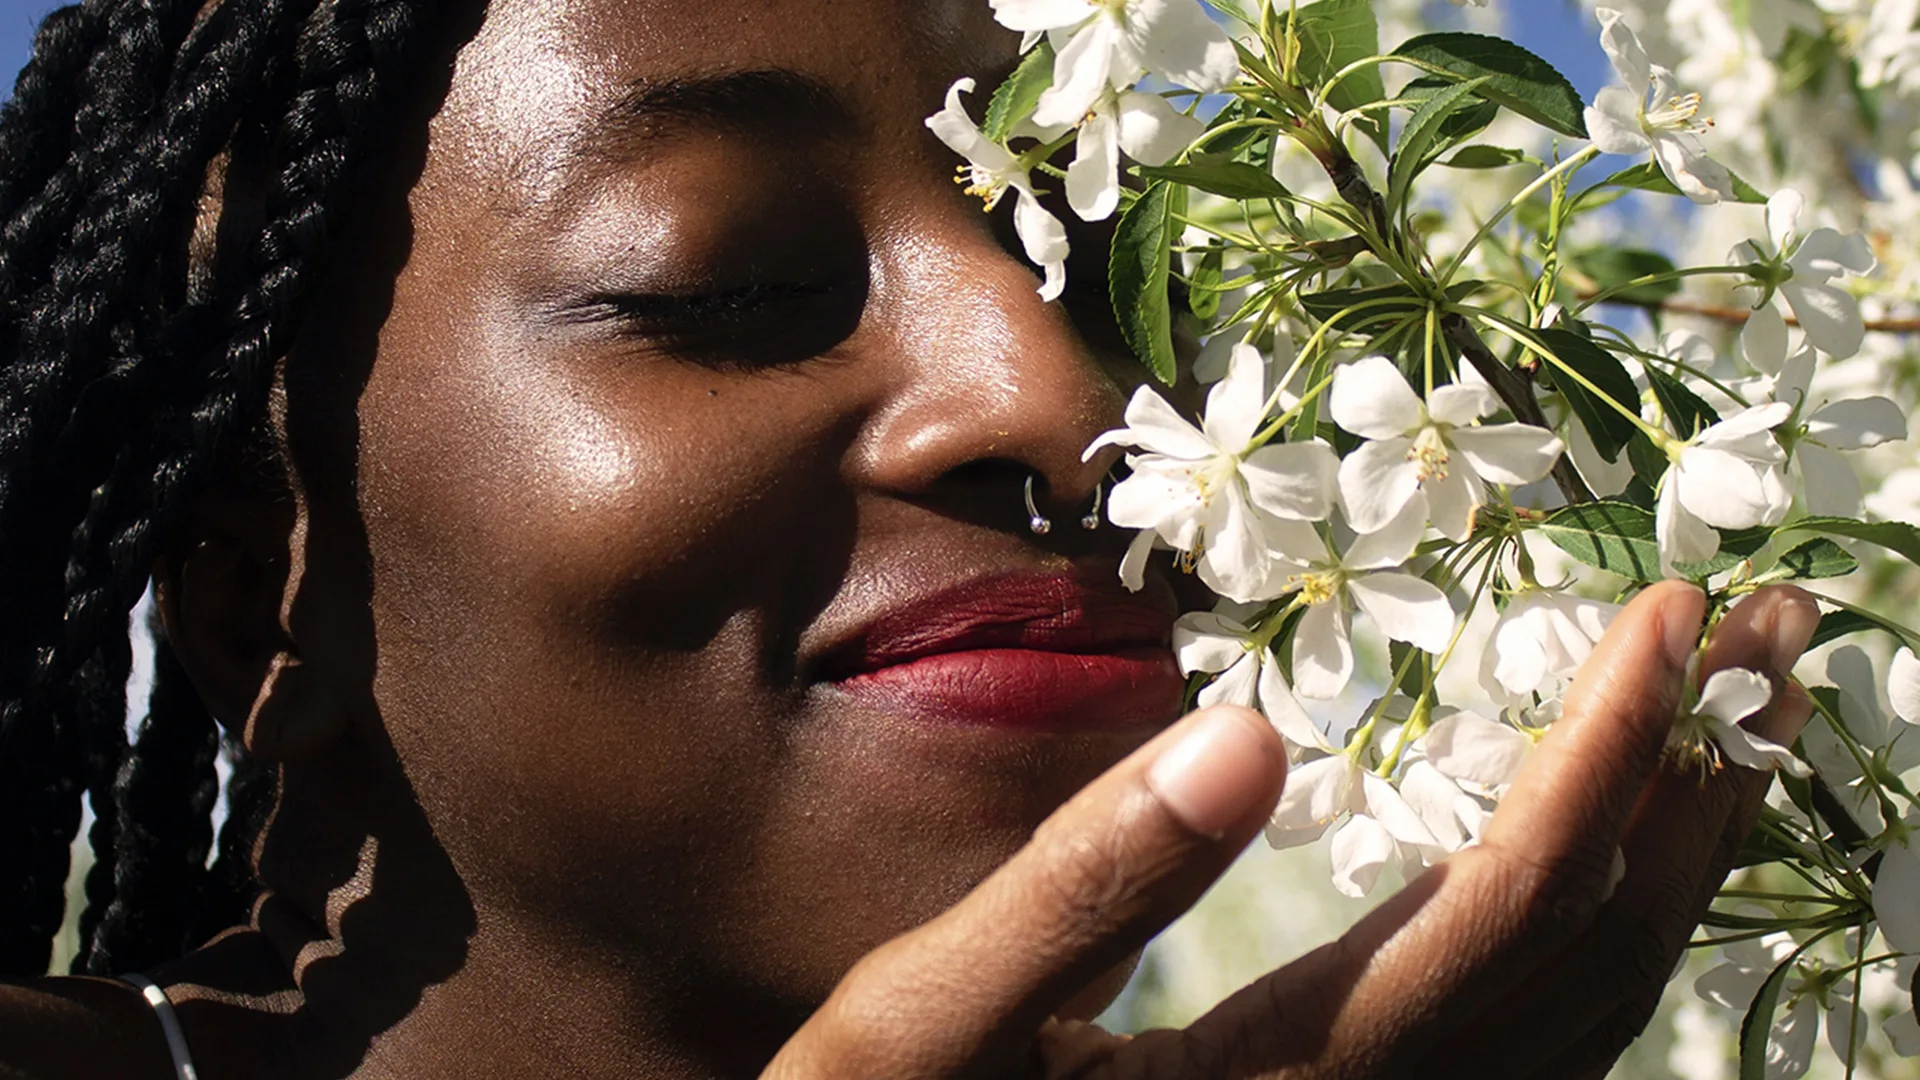 Woman sniffing some flowers and smiling